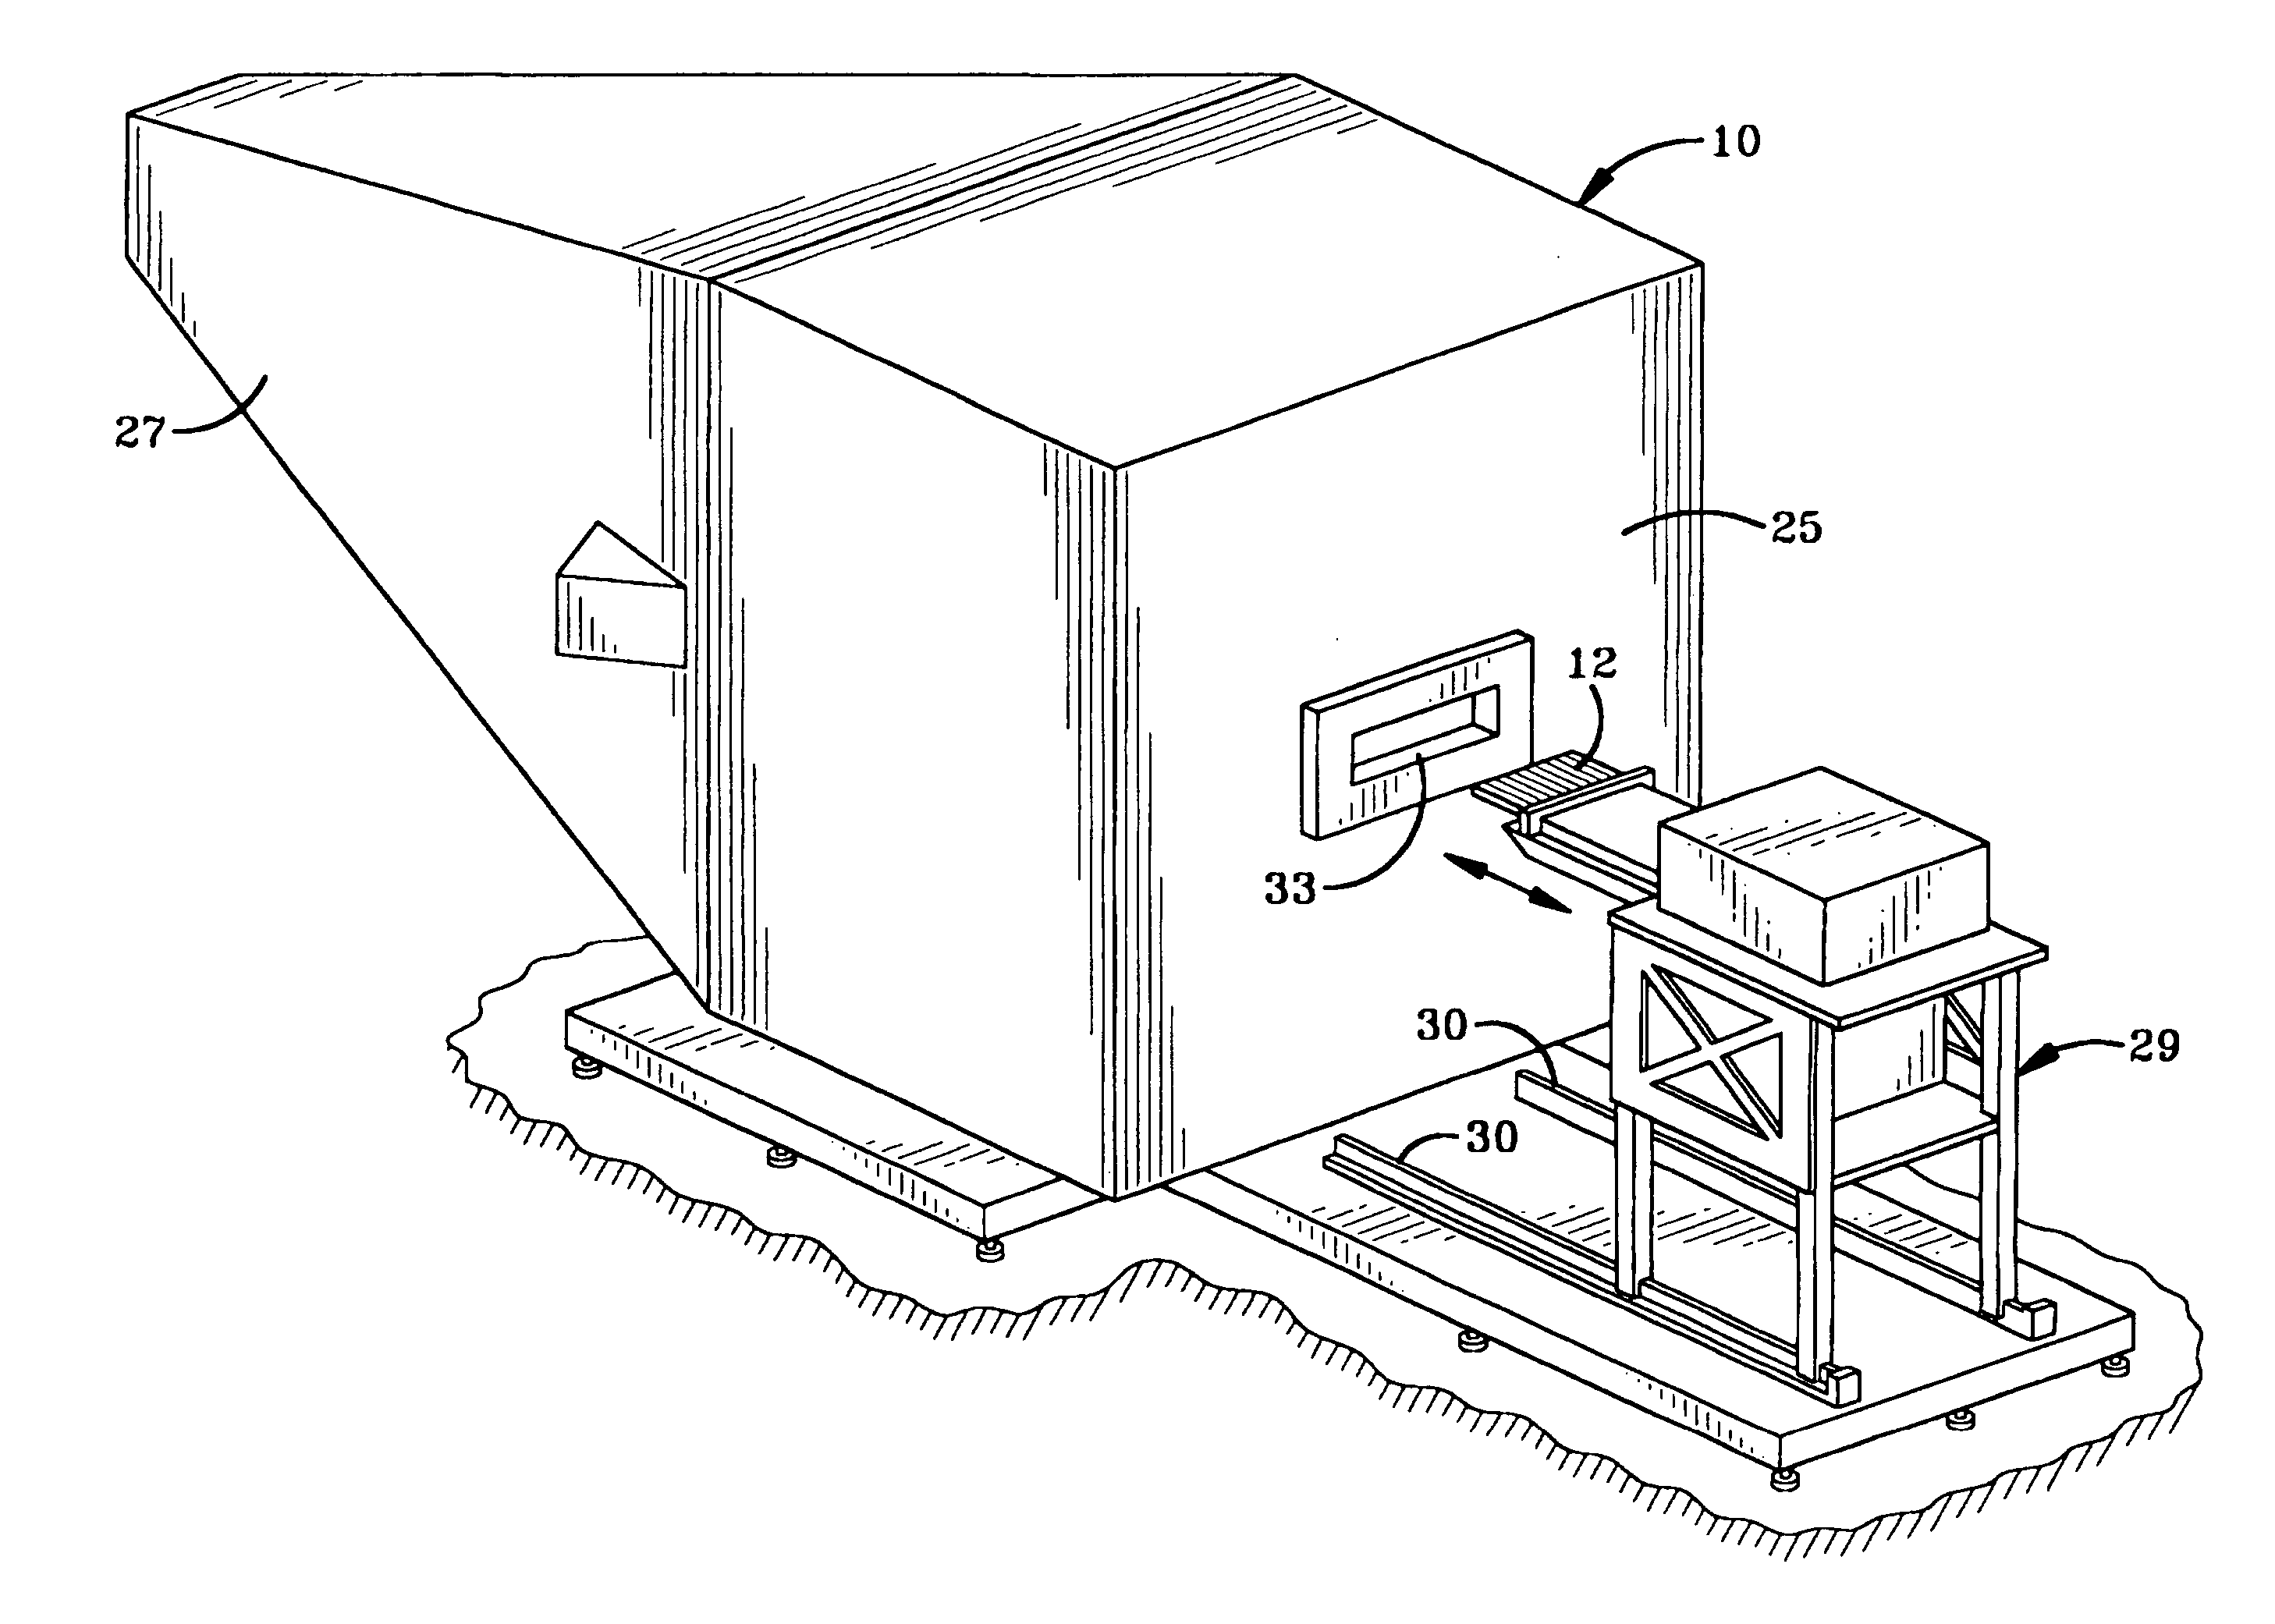 Method and System for Determining Antenna Characterization